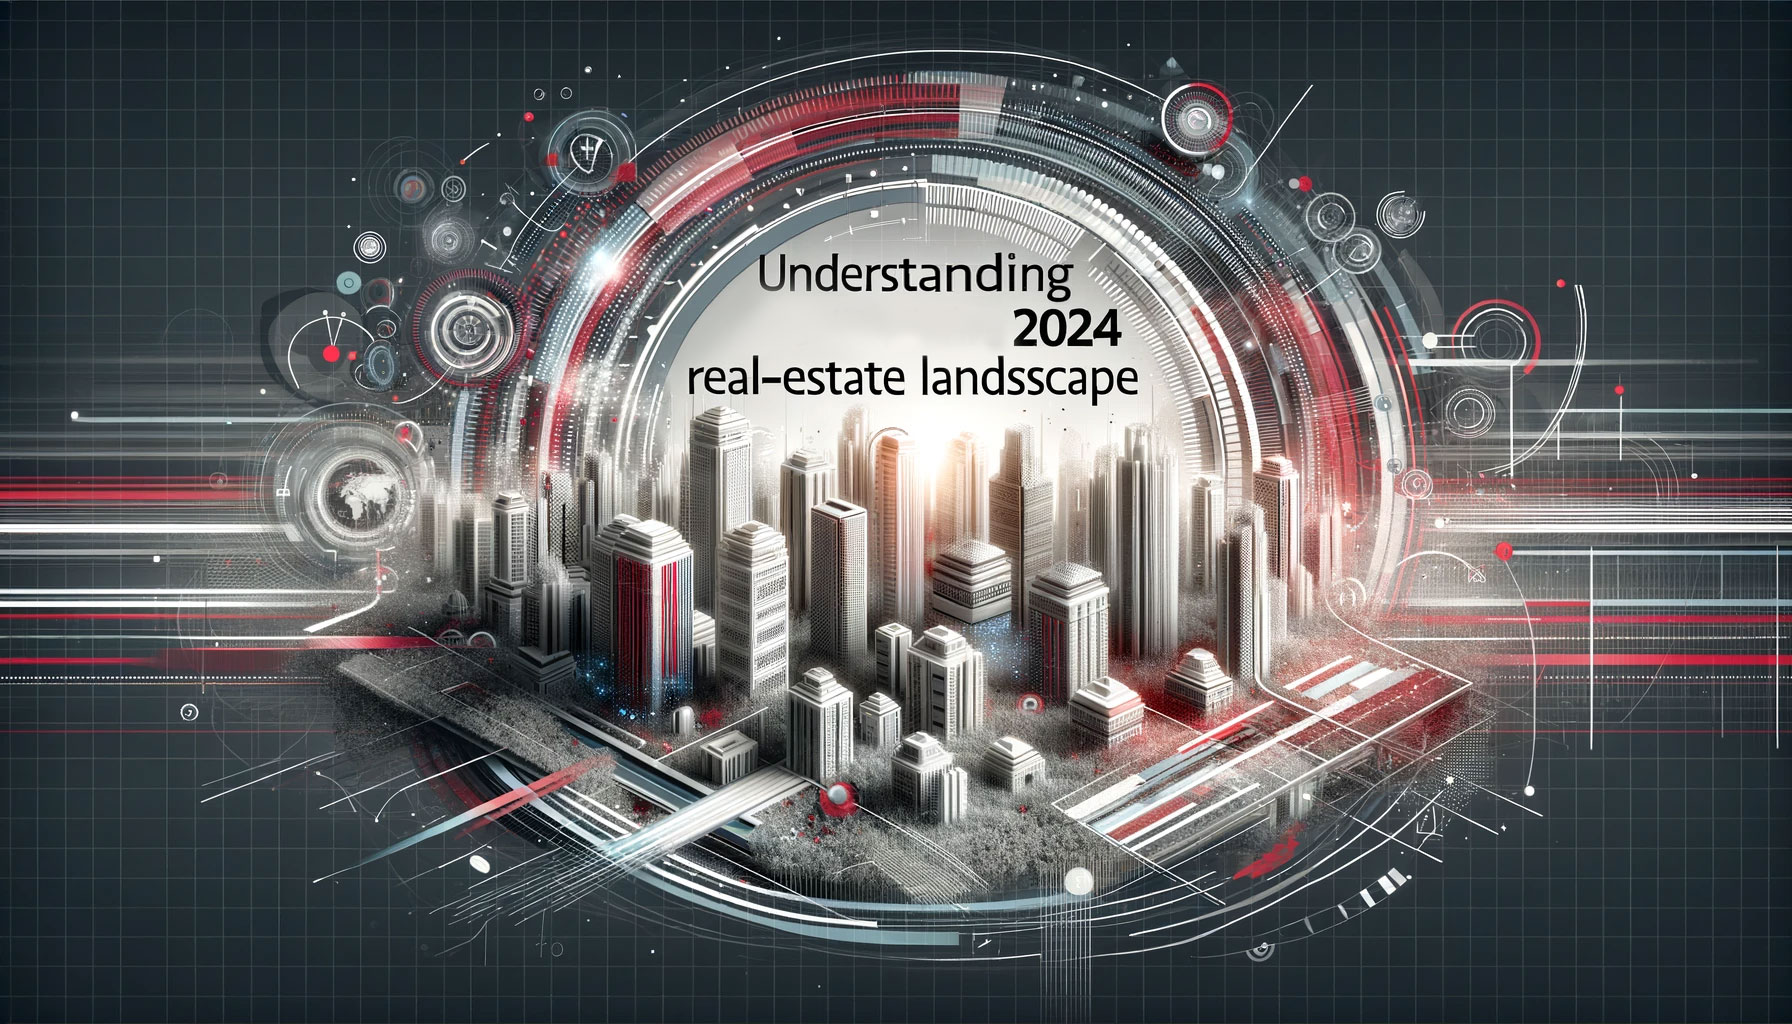 The Best Real-Estate Marketing Plan for 2024 HiT Land